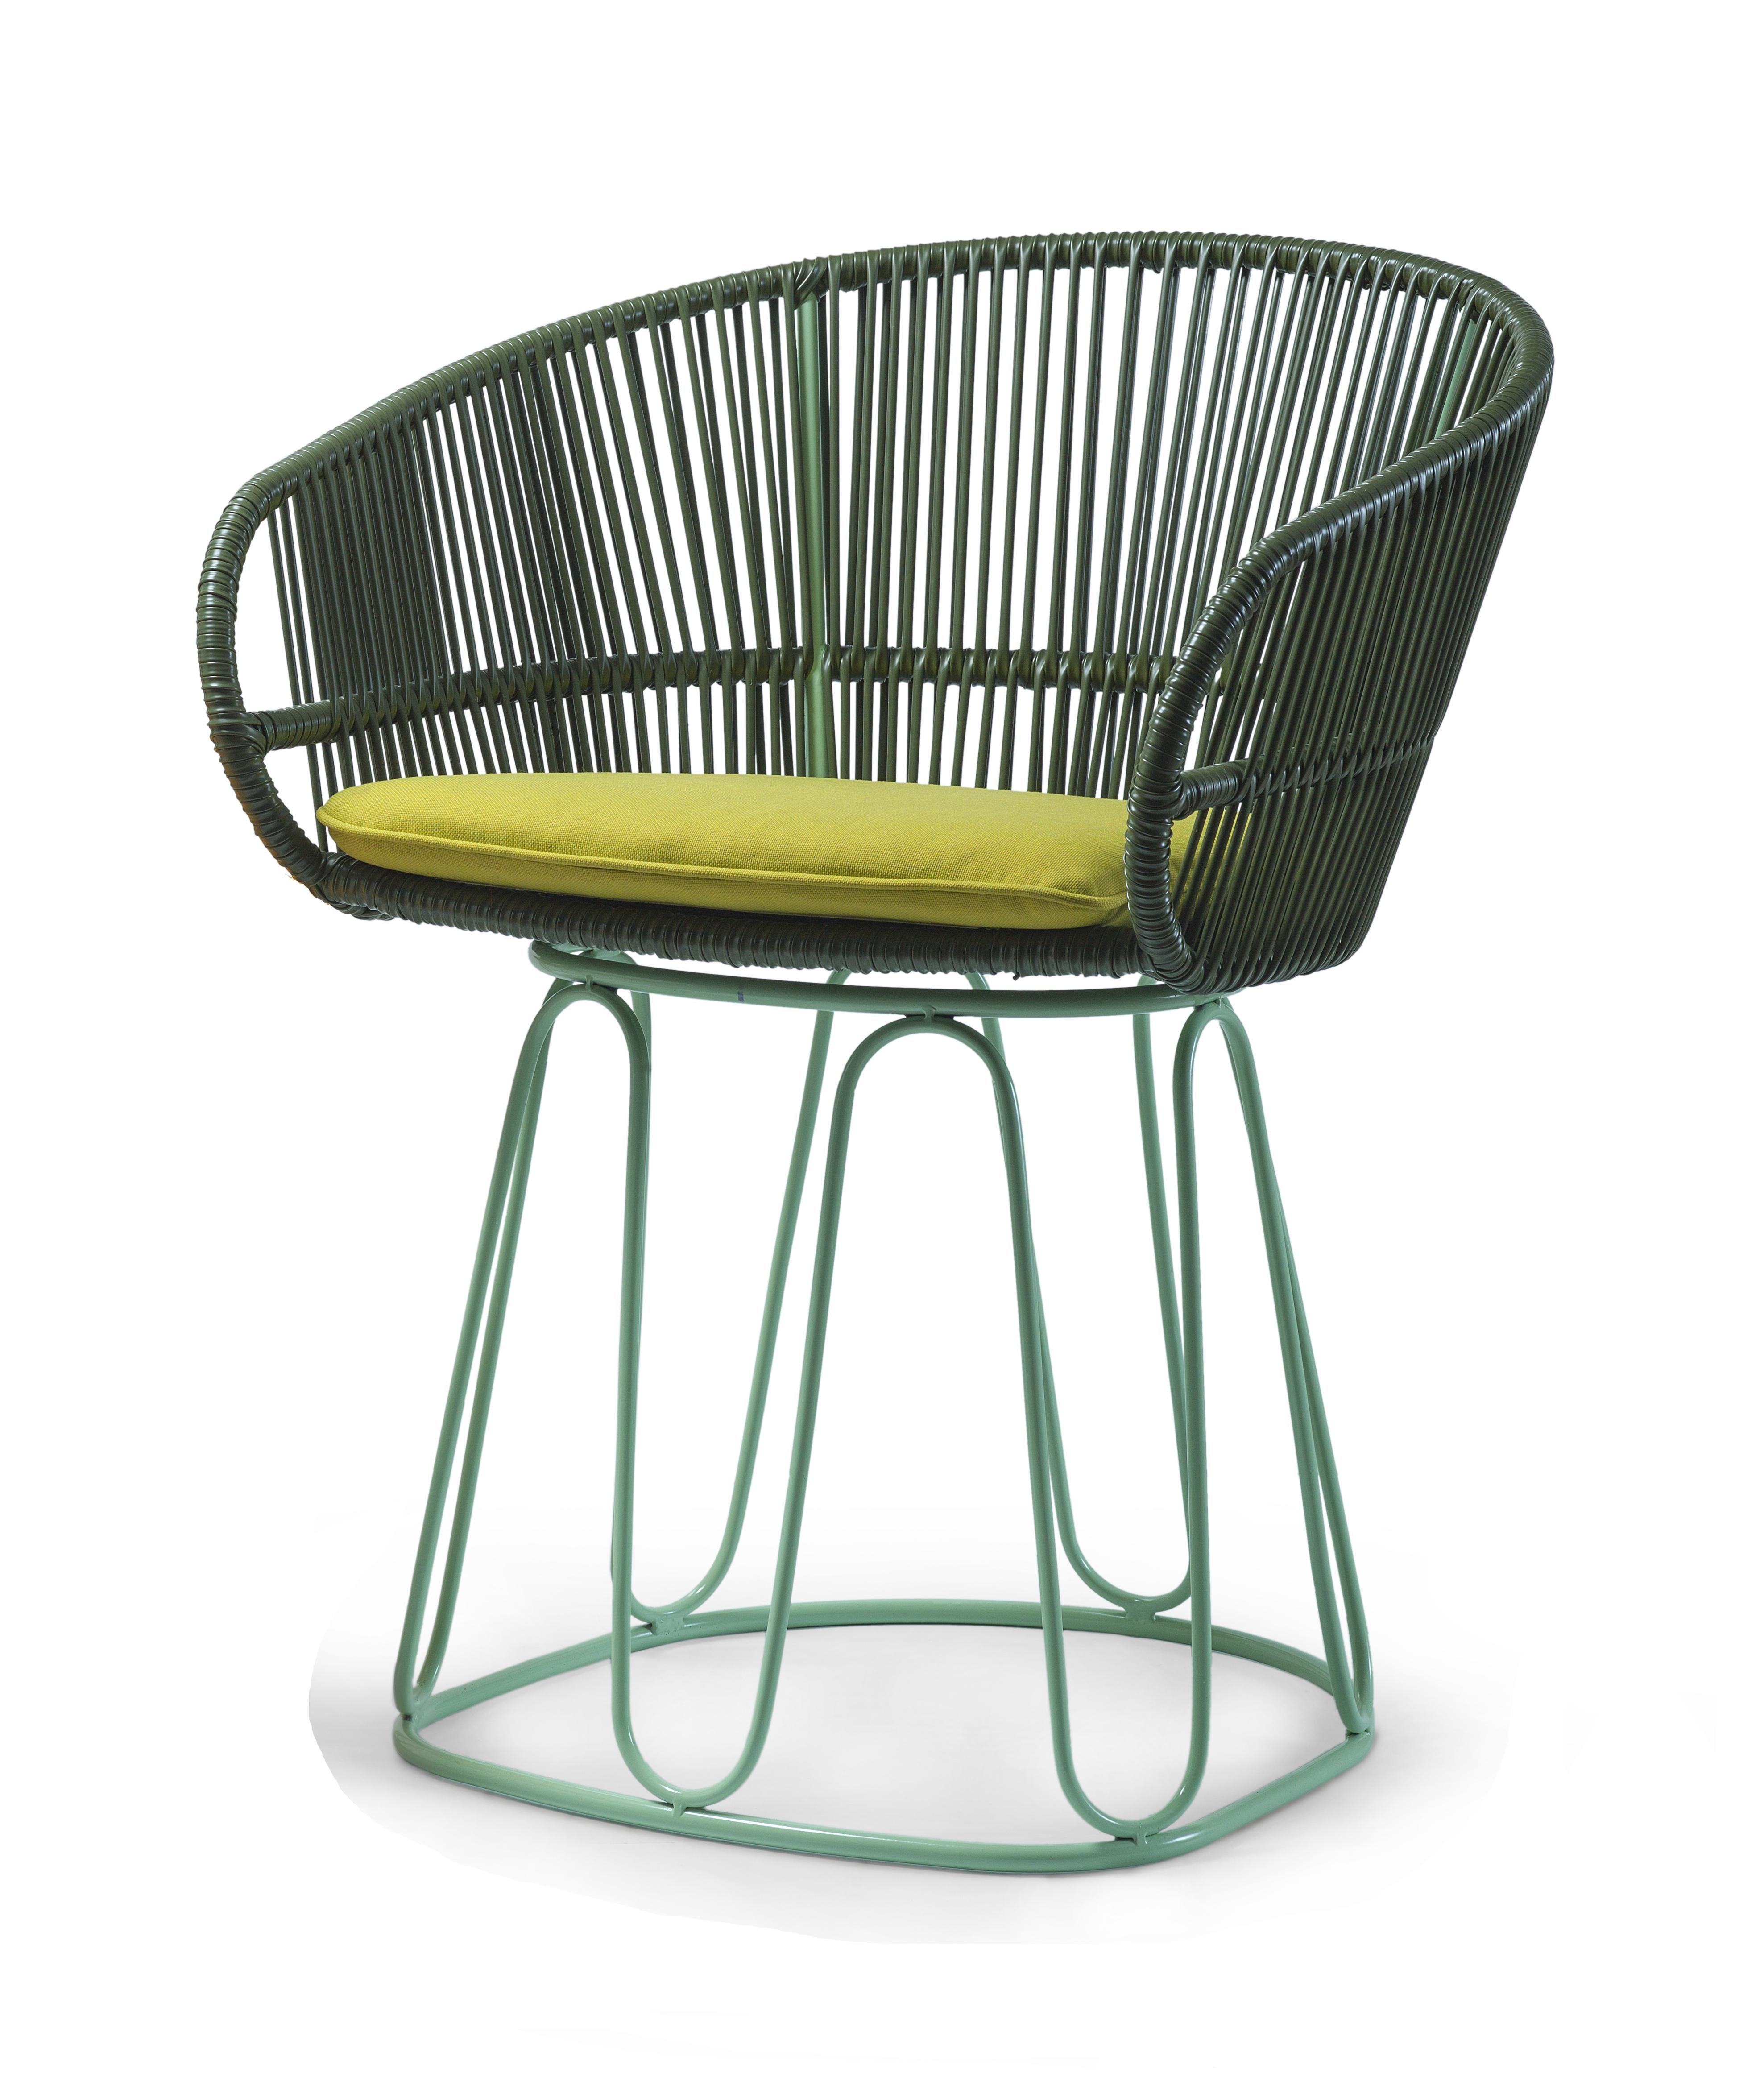 Olive Circo dining chair by Sebastian Herkner
Materials: galvanized and powder-coated tubular steel. PVC strings.
Technique: made from recycled plastic. Weaved by local craftspeople in Colombia. 
Dimensions: W 61.5 x D 56.5 x H 77.5 cm